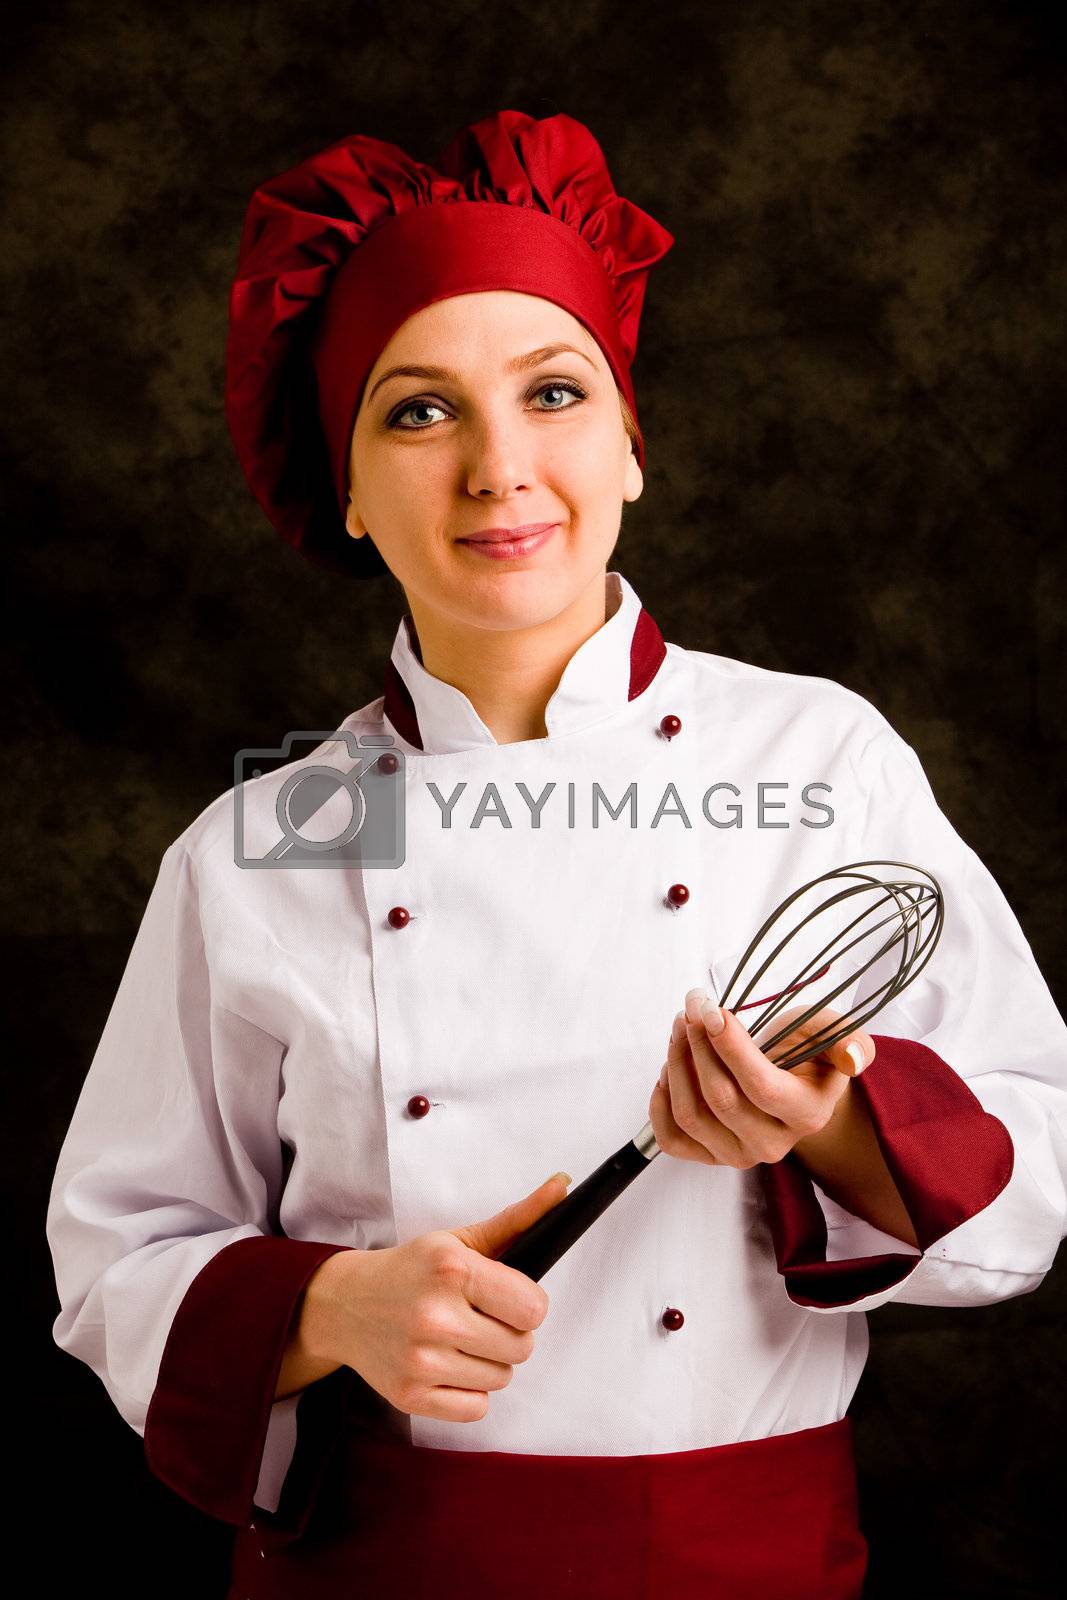 Royalty free image of Chef with whip by genious2000de